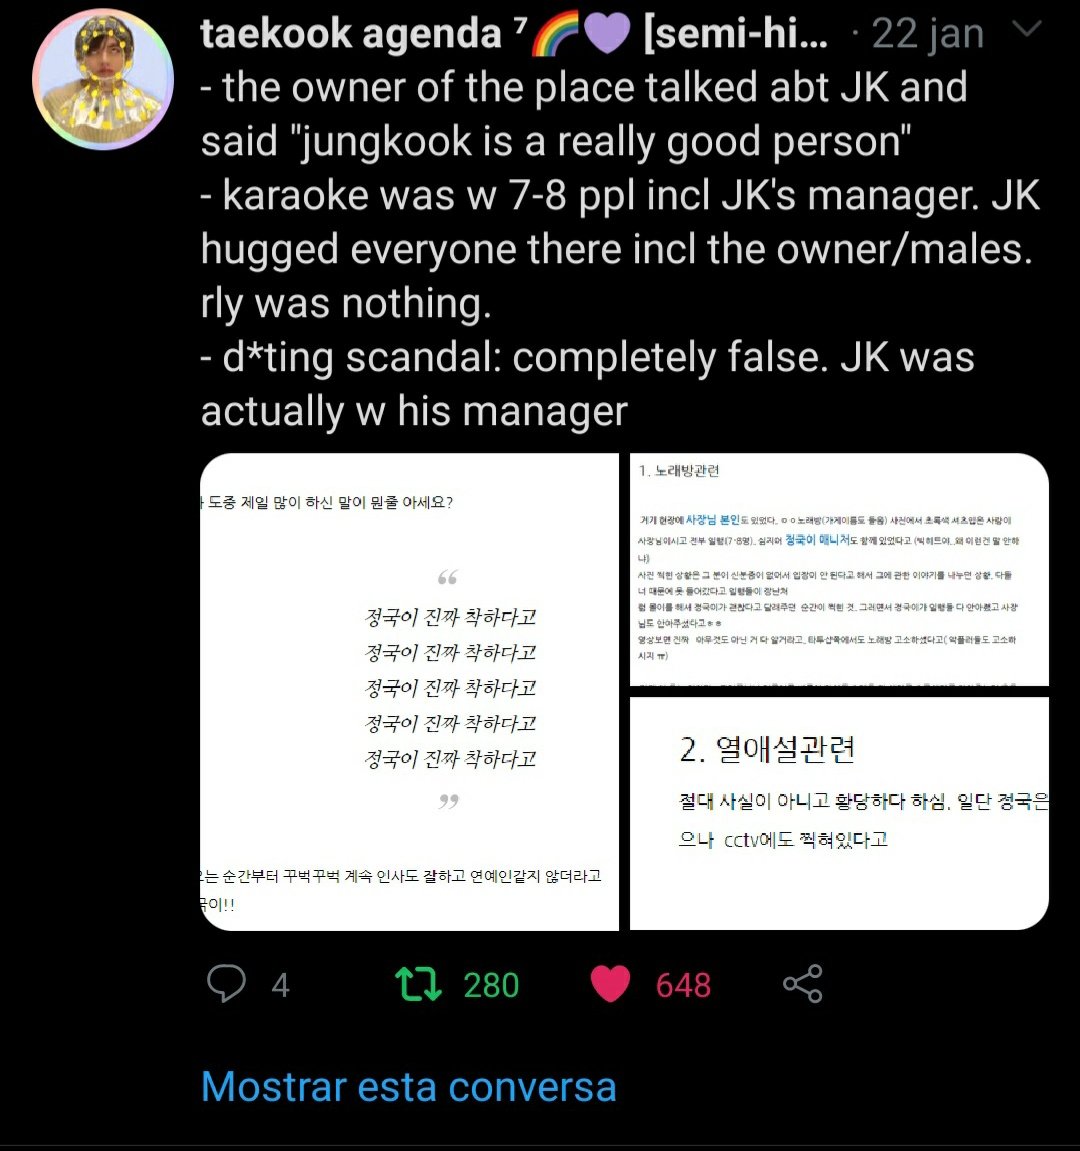 The tattooer was with friends on the island too so they shared a meal and then went to the karaoke room.The group was 7/8 ppl including the owner of the guesthouse who got J.k's autograph and who a few months ago told and made clear what really happened.